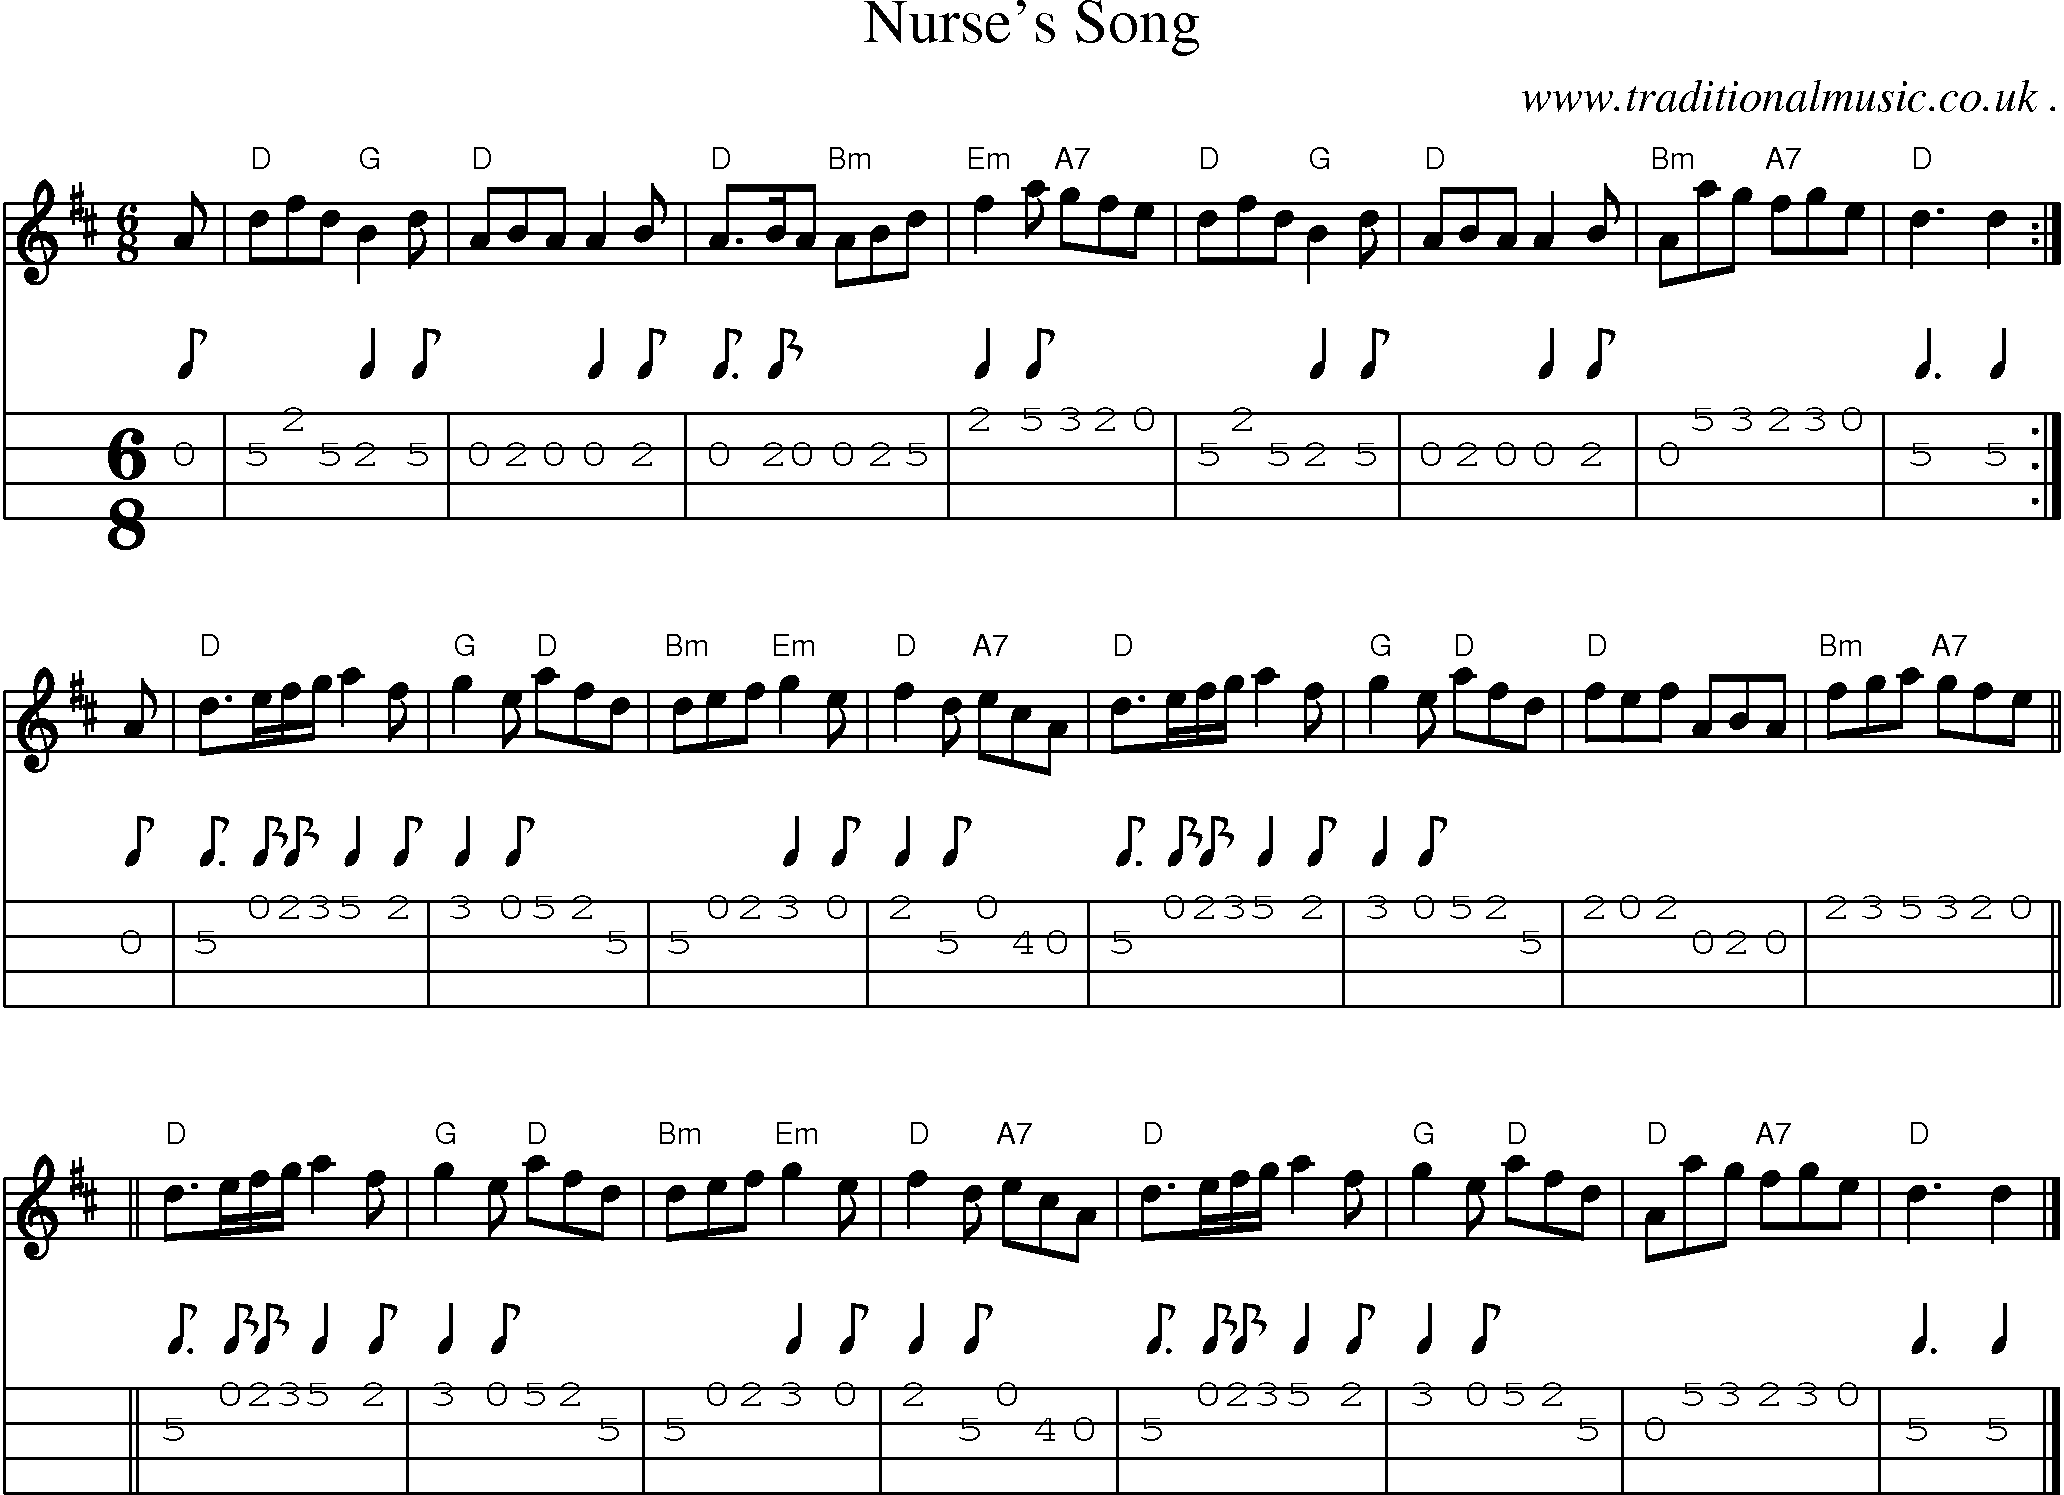 Sheet-music  score, Chords and Mandolin Tabs for Nurses Song